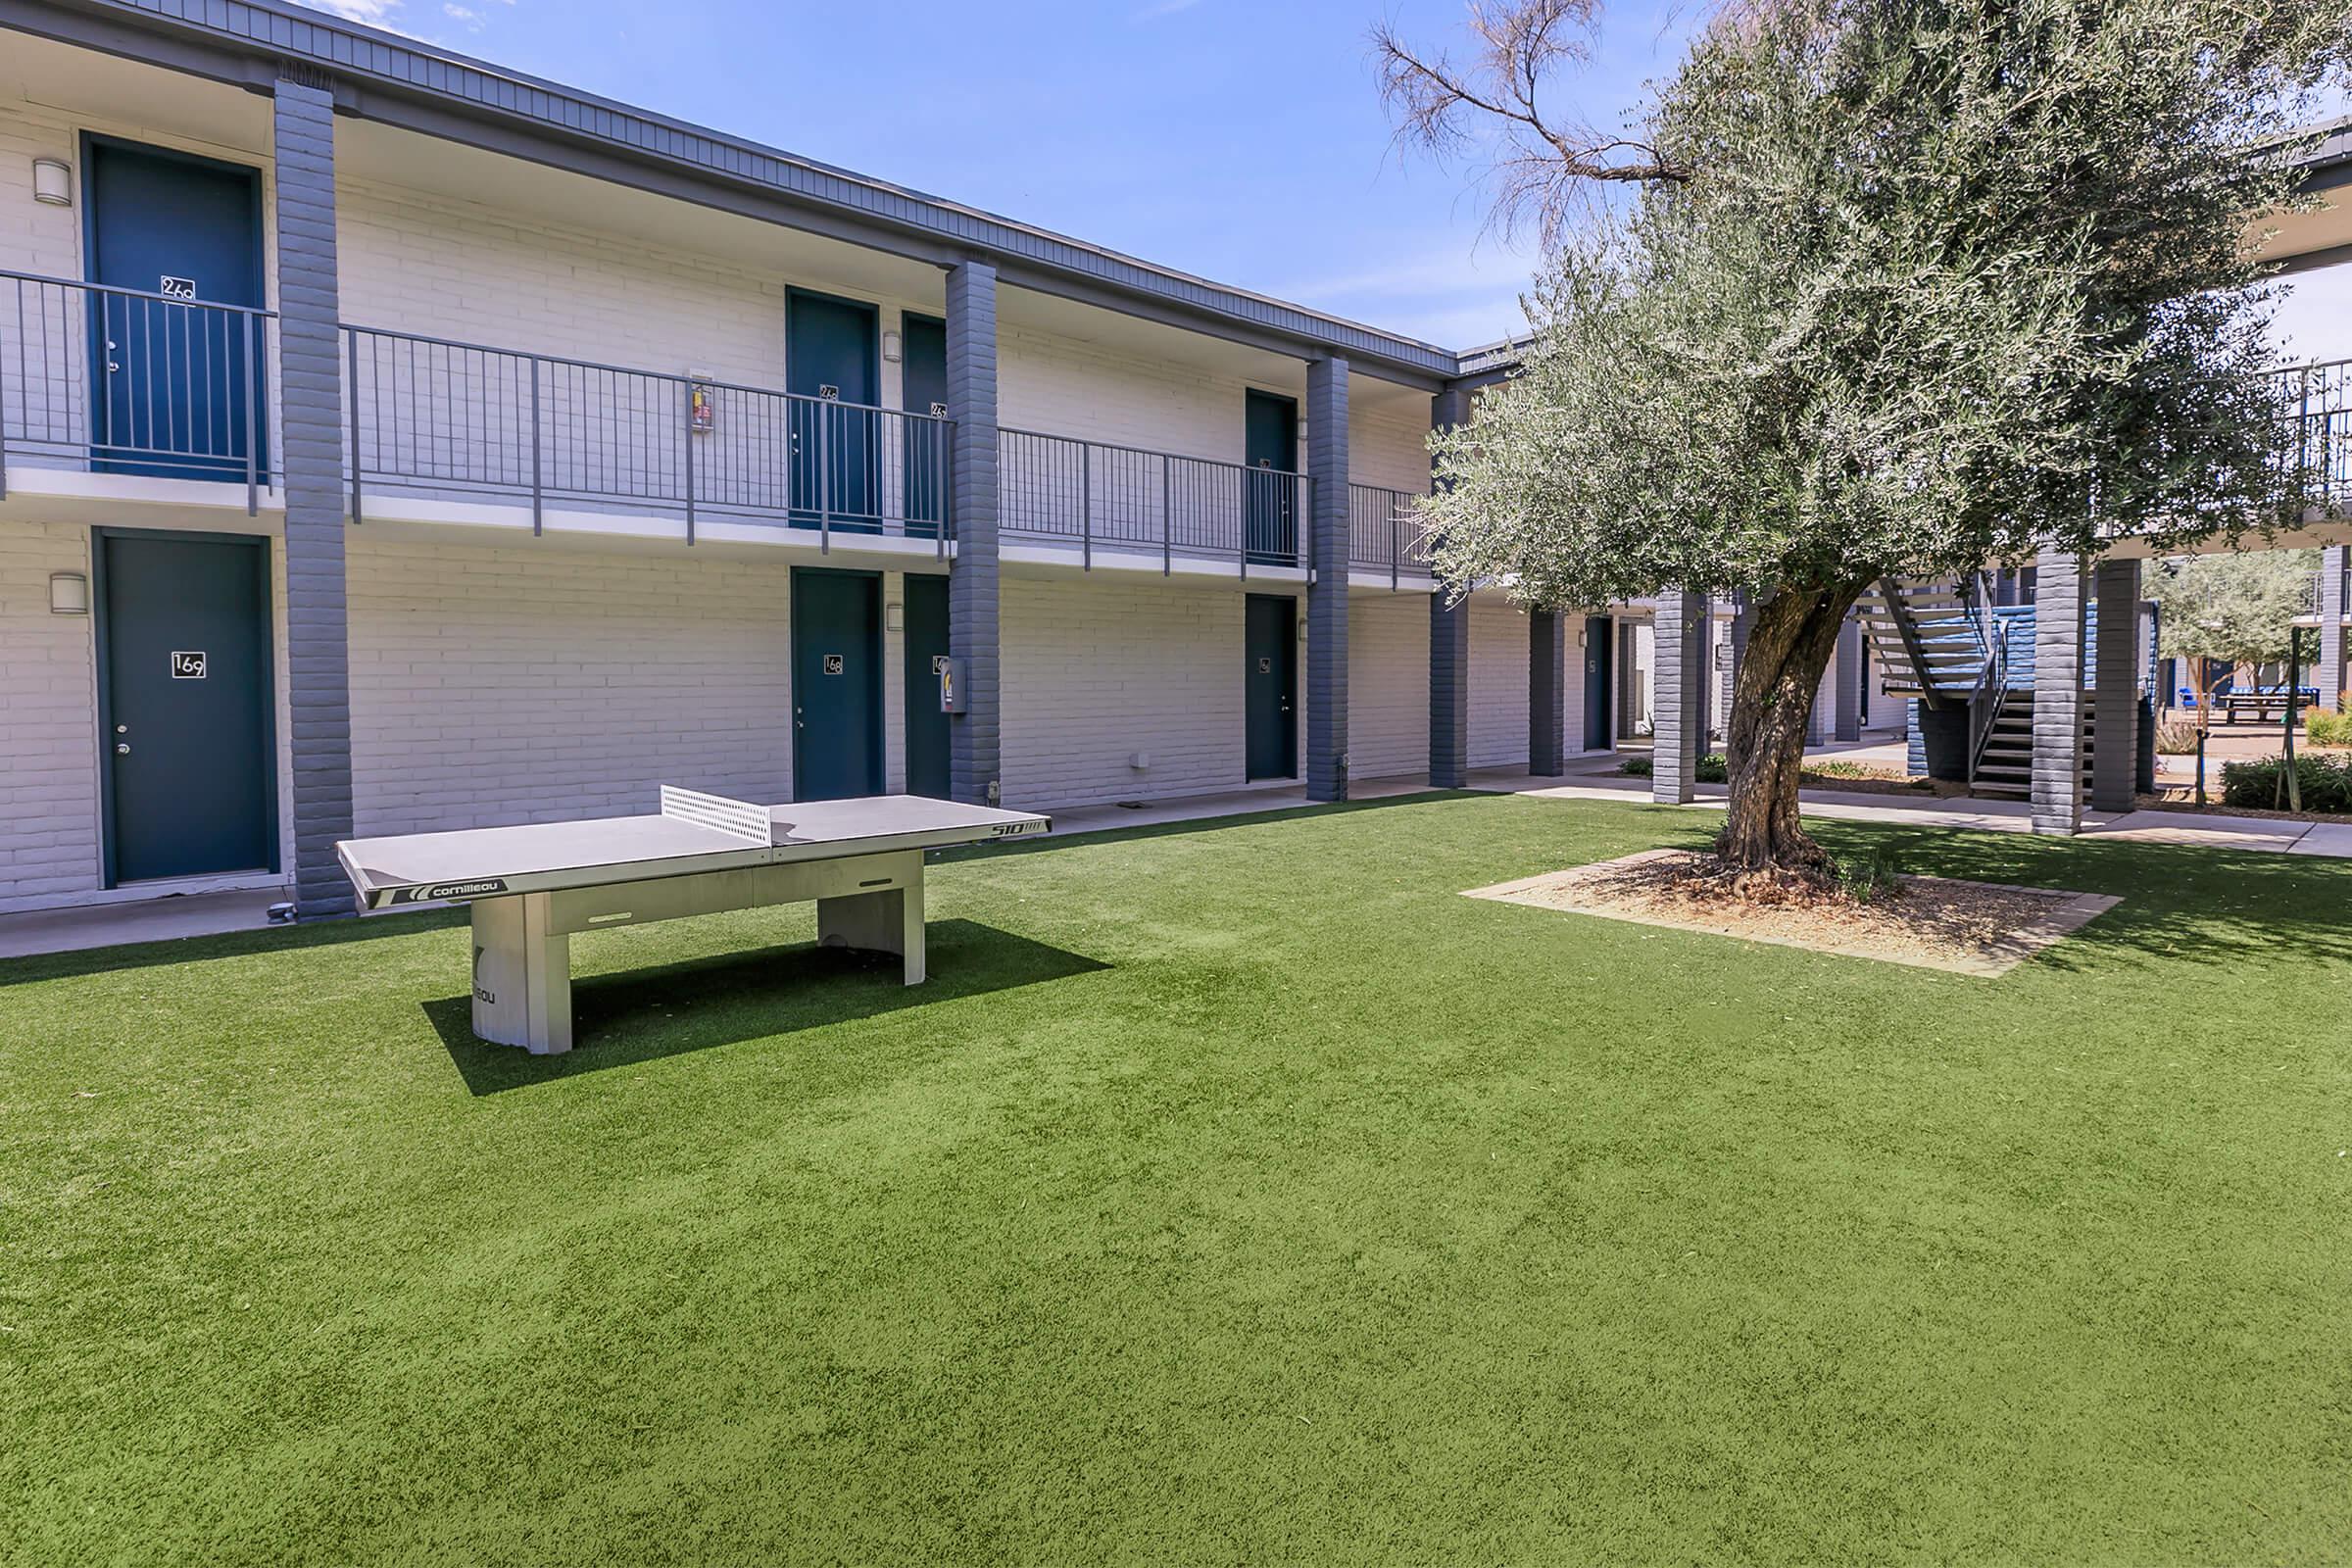 Outdoor grass courtyard nestled next to a large two-story Phoenix apartments